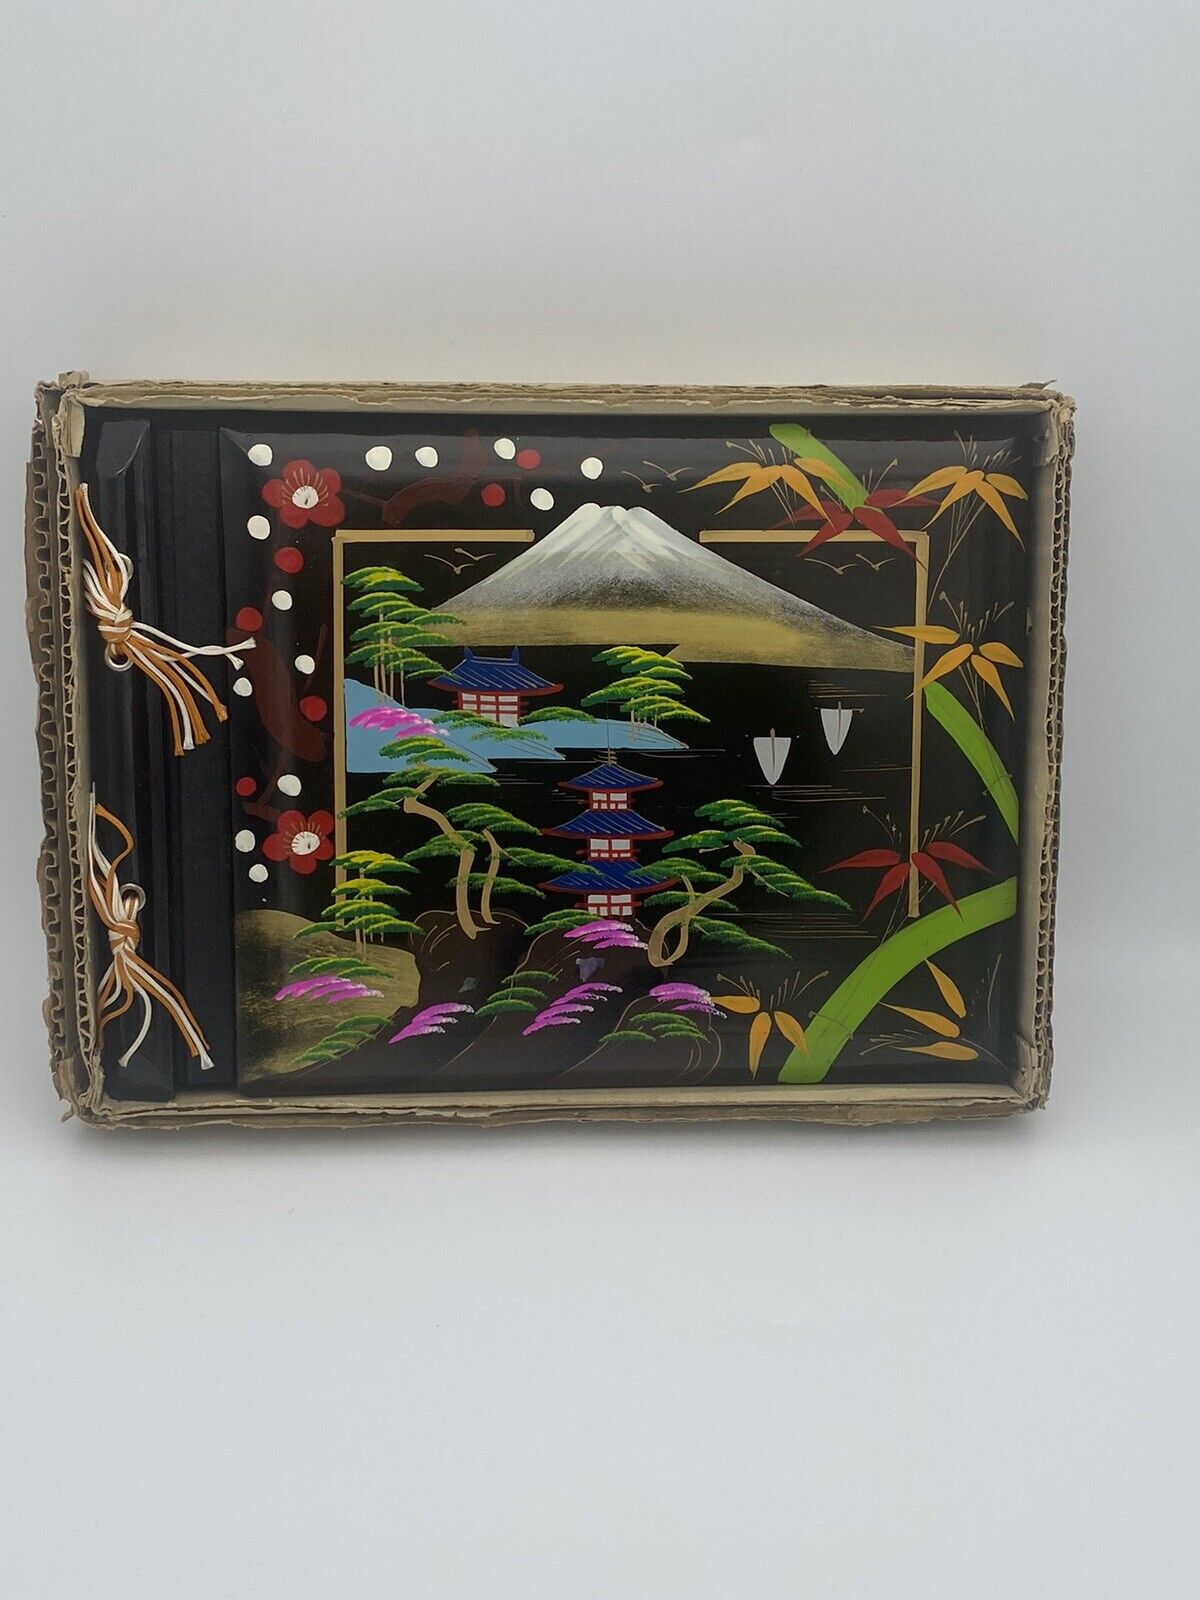 Vintage Japanese Lacquer Hand Painted Photo Album Scrapbook unused Pages